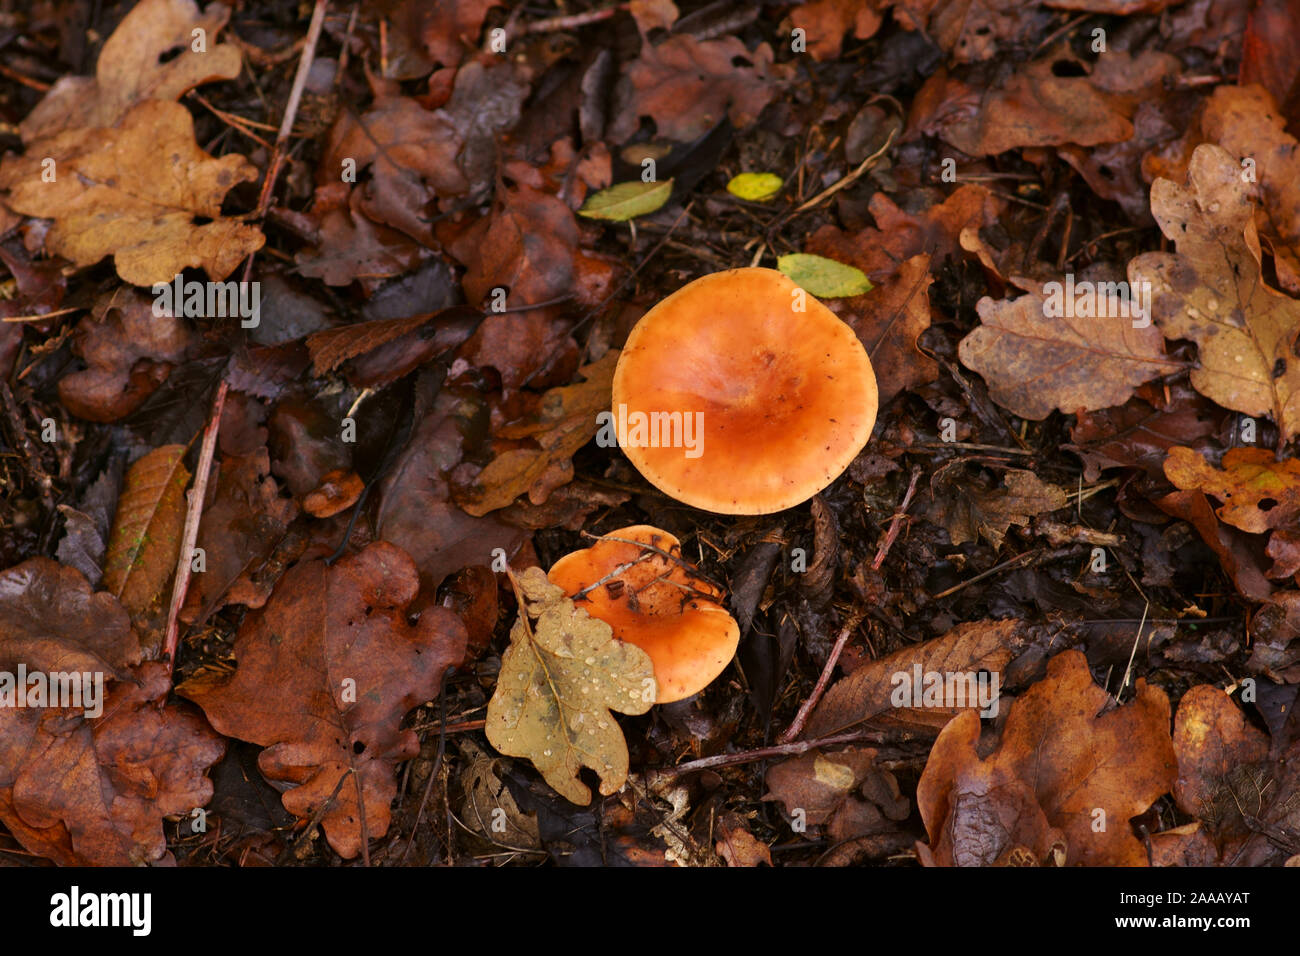 The top view and close-up of the orange-brown to orange-yellow mushroom hat of a false chanterelle, Hygrophoropsis aurantiaca. Stock Photo